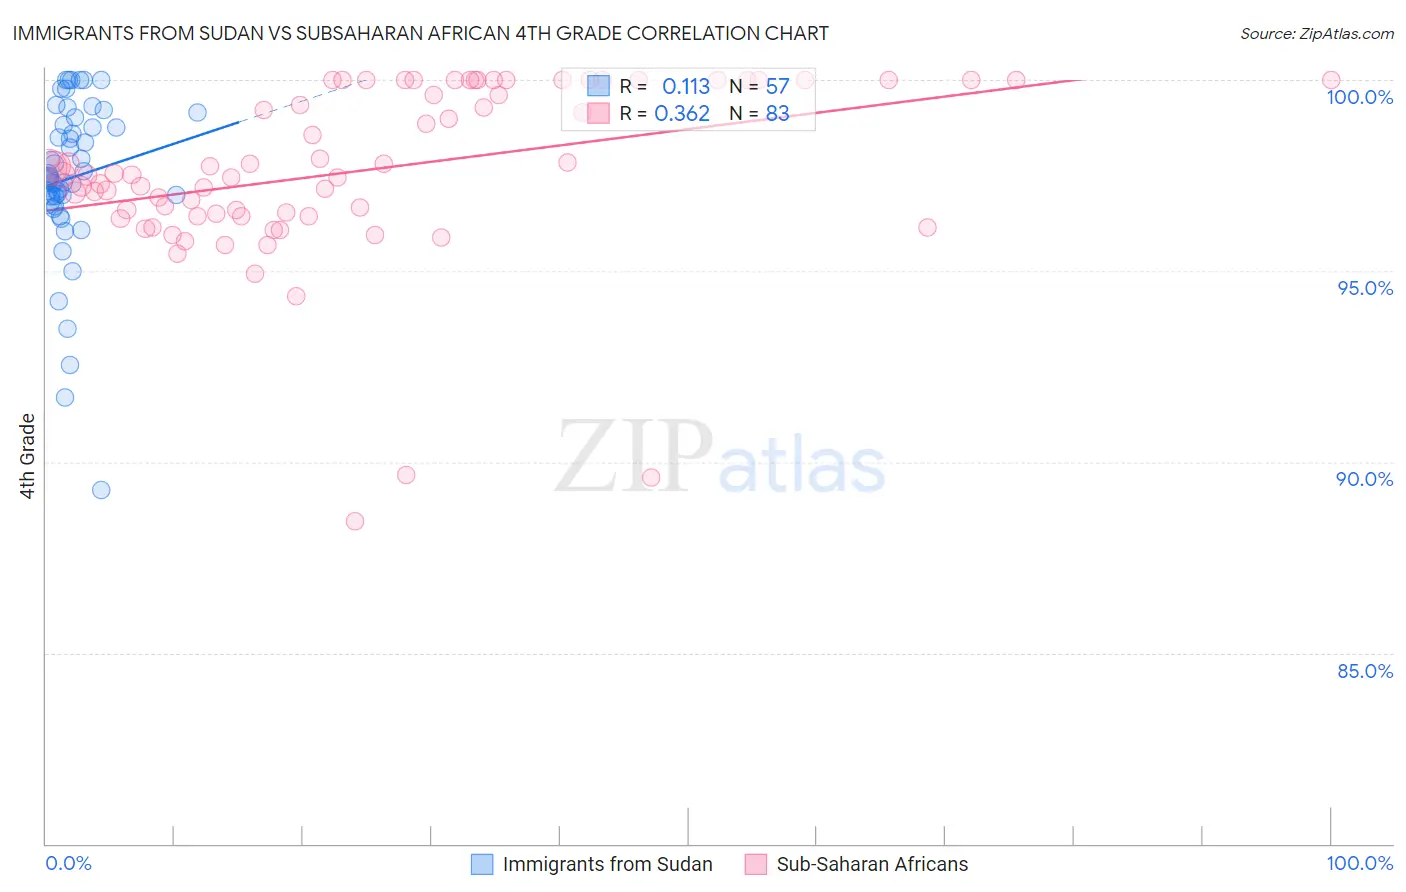 Immigrants from Sudan vs Subsaharan African 4th Grade